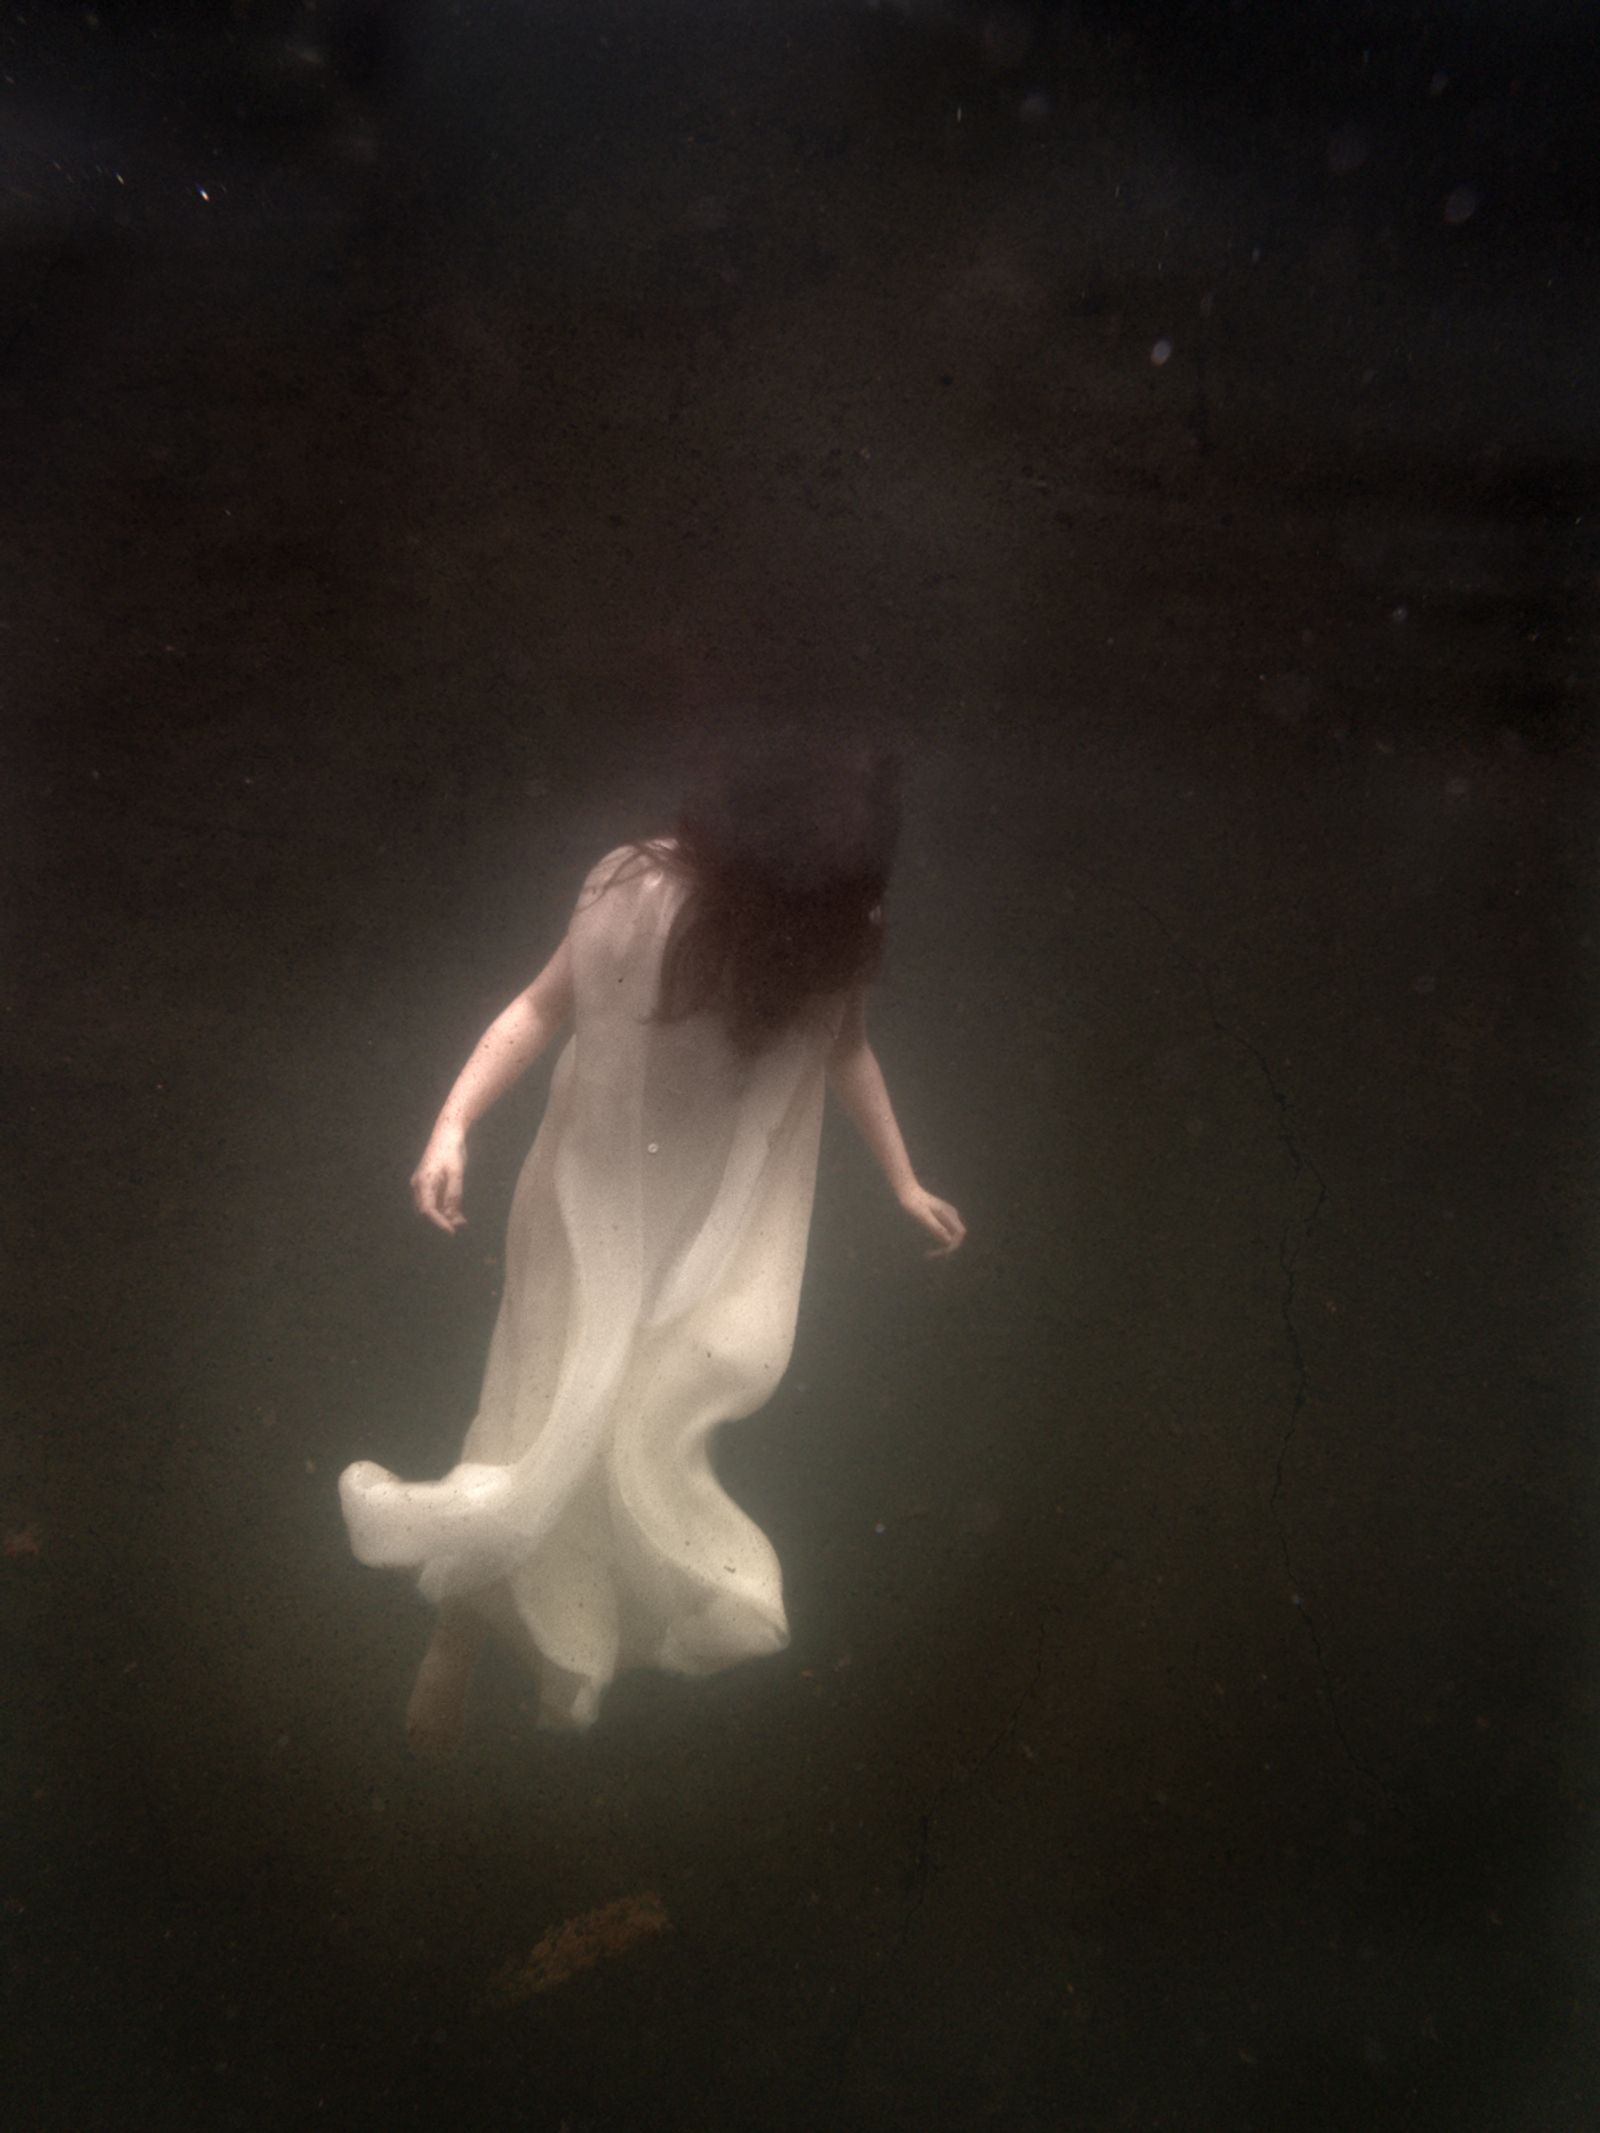 © Jessica Milberg - Image from the Deepest of them All photography project